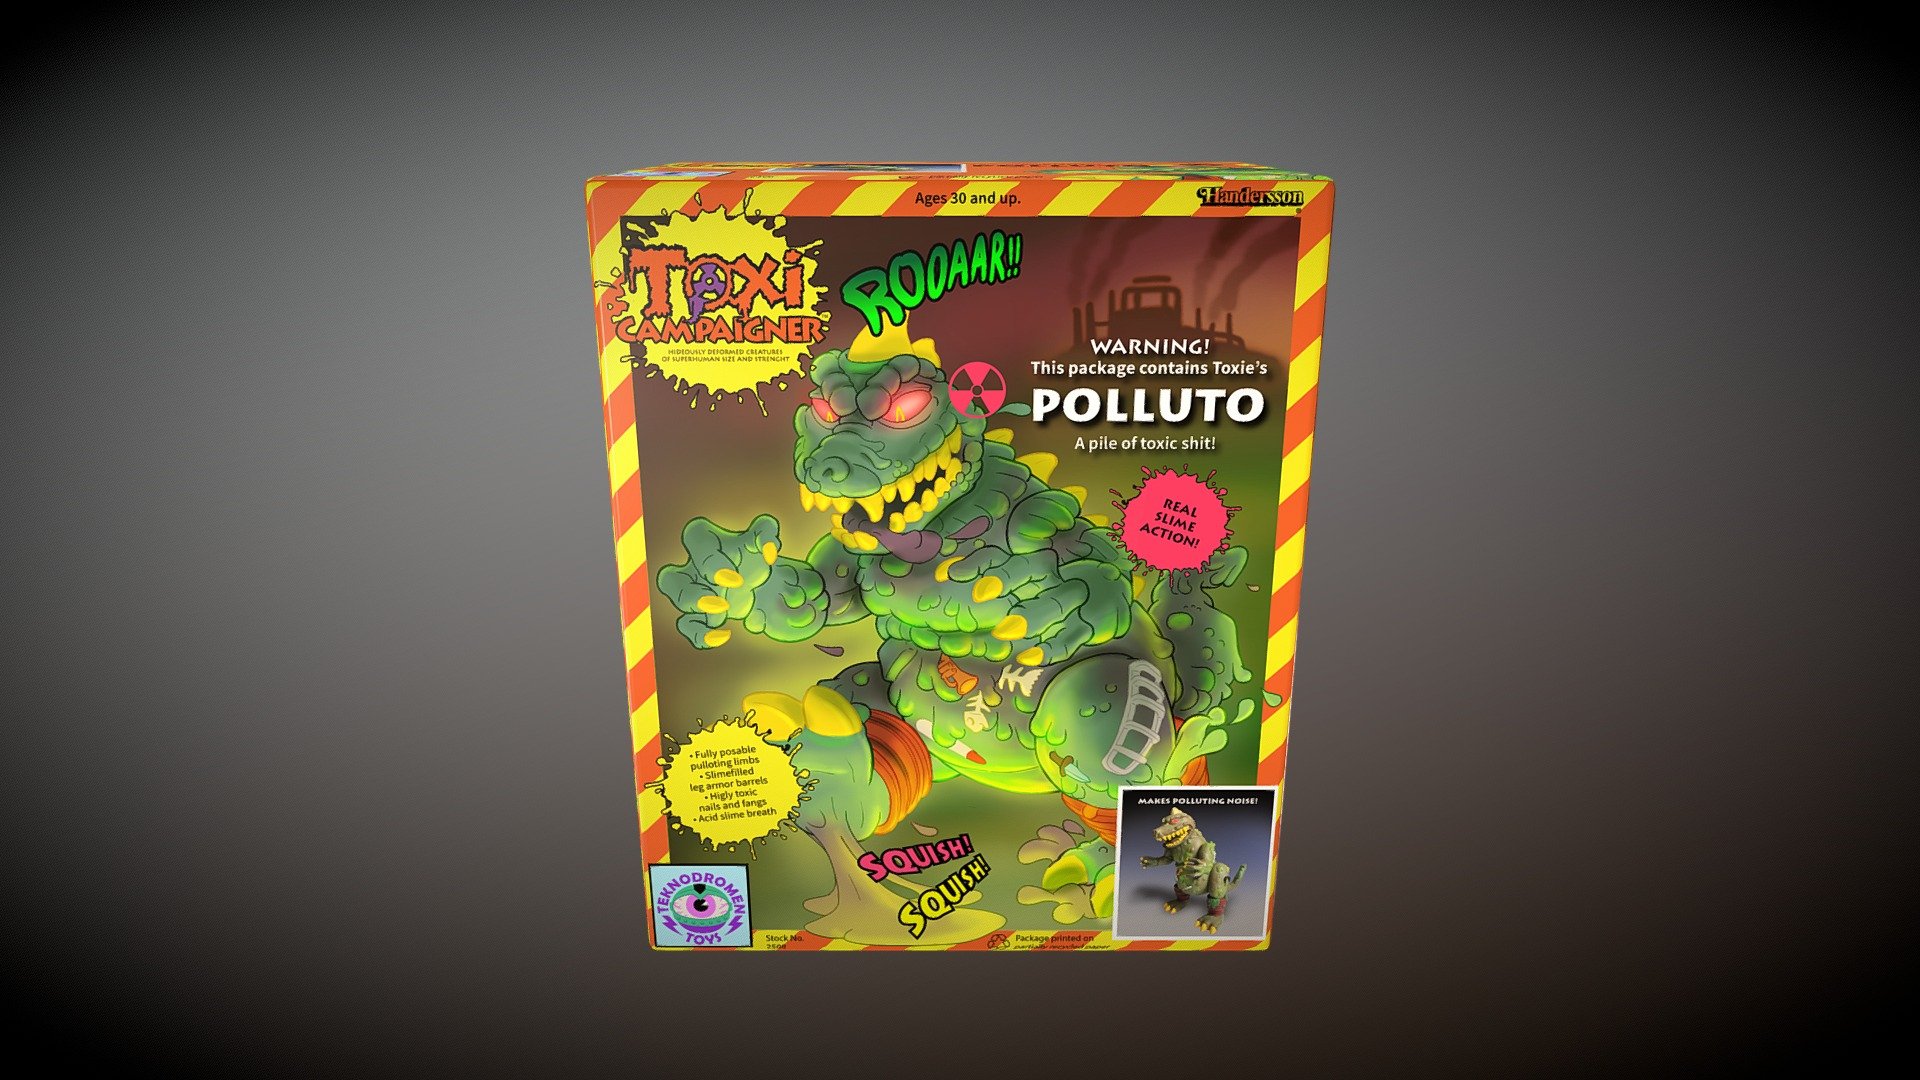 POLLUTO  is a custom made action figure made by fans, for He is based on the on the Toxic Crusader figure Polluto, who never made it pass 
prototype stage and out to the market.

Sculpting and painting is made by Sebastian Åhslund from Halmstad Sweden.Boxart and graphic design is made by Henrik Andersson from Hönö Island Sweden.Follow their work online for future cool toy projects!

Sebastian Åhslund: 
@teknodromen84 on Instagram
Henrik Andersson:
@stuffbyhandersson on Instagram
www.handersson.com - Polluto Box - 3D model by handersson 3d model